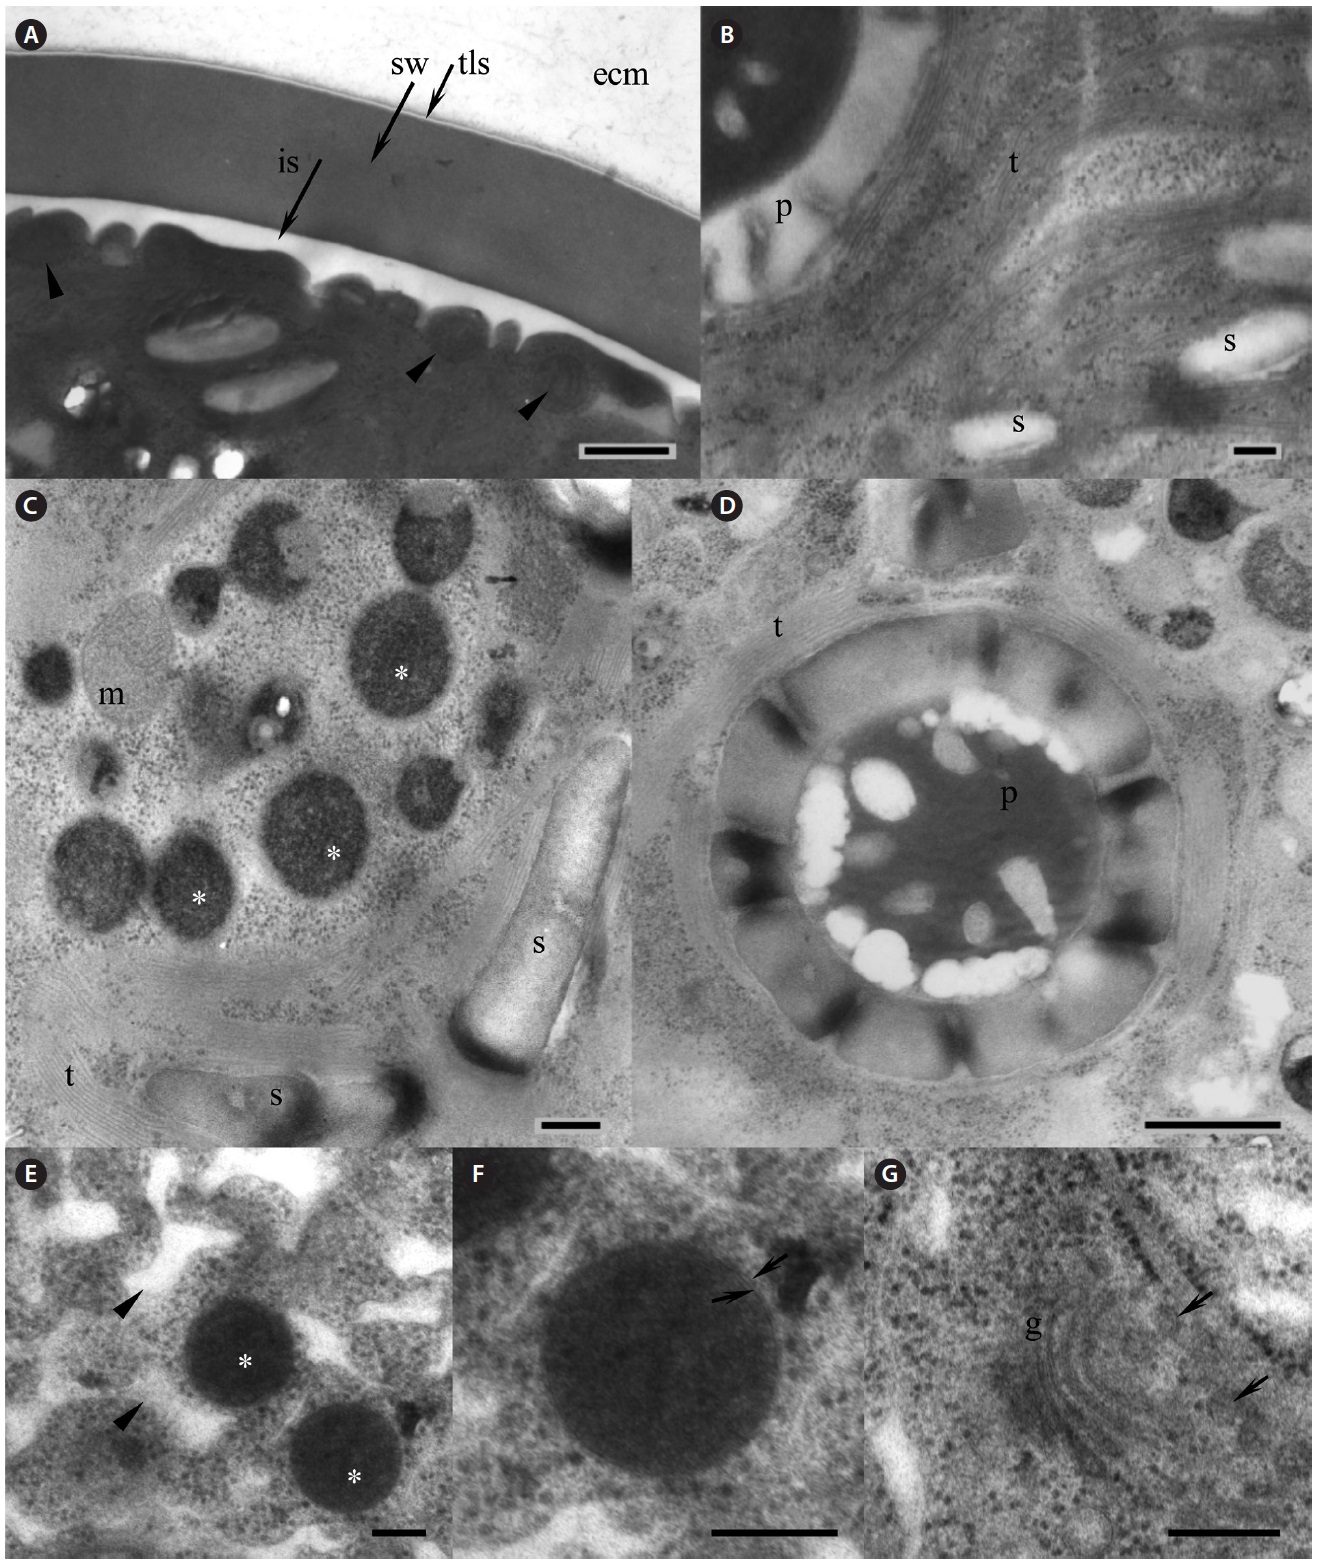 Electron microscopy of Haematococcus pluvialis palmelloid cells. (A) Thick cell wall of the palmelloid cell, showing trilaminar sheath (tls, arrow) and smooth secondary wall (sw). Arrowheads point to mitochondria located beneath the cell membrane. (B) Arrangement of the thylakoids in the chloroplast. (C) Numerous lipid vesicles (asterisks) scattered in the cytoplasm of green palmelloid cell. (D) Pyrenoid within a starch-containing chloroplast. (E) Electron-dense astaxanthin-containing lipid vesicles (asterisks) scattered in the heterogeneous segregated cytoplasm (arrowheads) of the red palmelloids. (F) Enlarged lipid vesicle. Arrows point to a membrane surrounding the vesicle. (G) Vertical section through the Golgi body (g). Arrows point to the adjacent Golgi vesicles. ecm, extracellular matrix; is, interspace; m, mitochondrion; p, pyrenoid; s, starch; t, thylakoids. Scale bars represent: A, C & E-G, 200 nm; B & D, 500 nm.